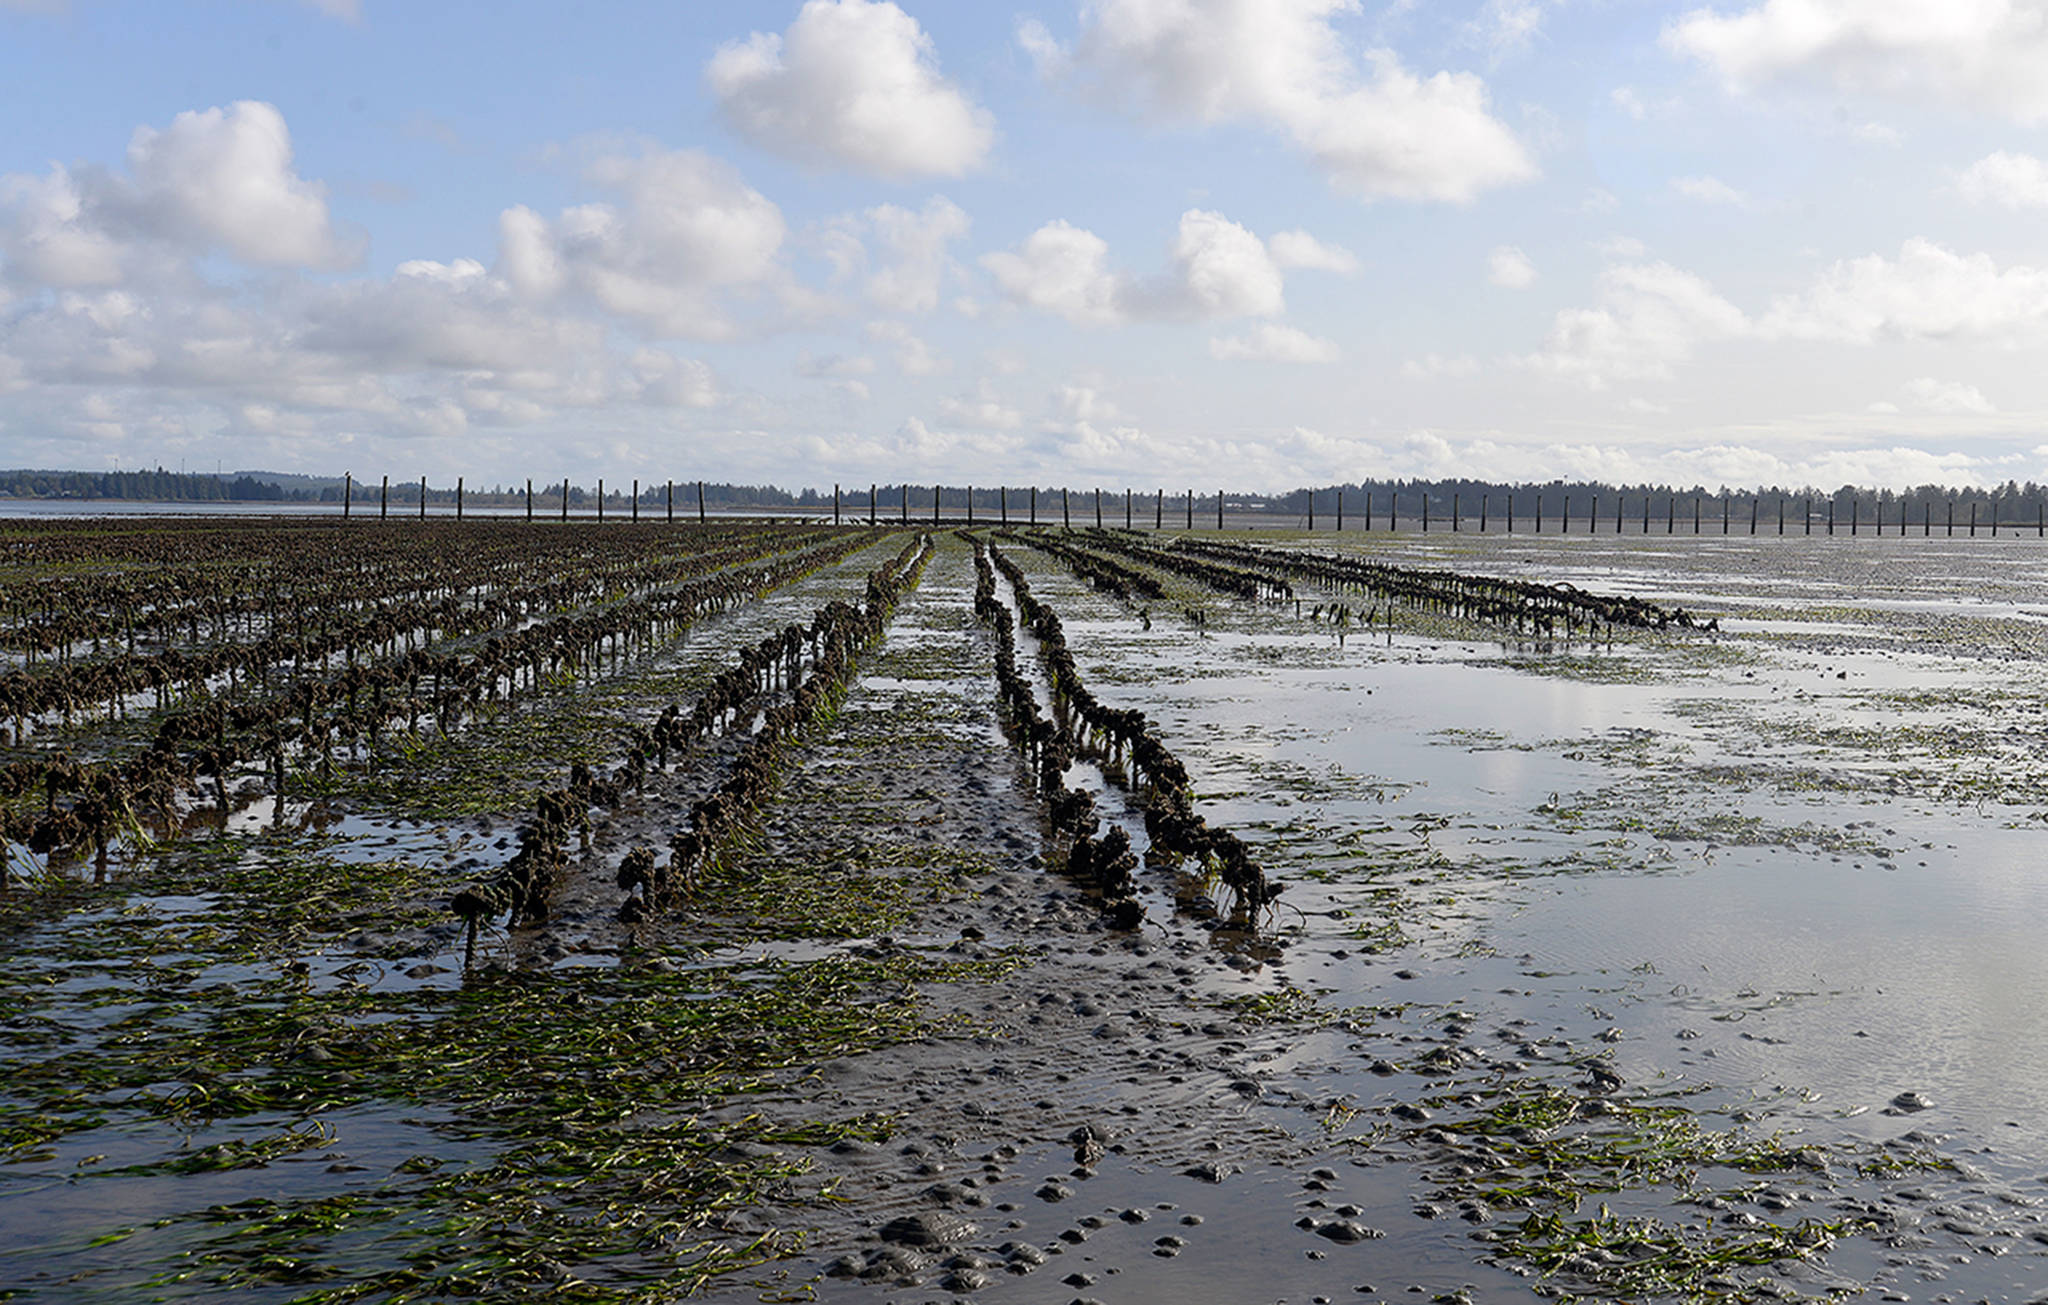 Louis Krauss | The Daily World                                This shot of oyster lines near Westport at low tide shows how the mud is loaded with burrowing shrimp, indicated by the small bumps. The barren area to the right was suitable for oyster growing before the shrimp took over.